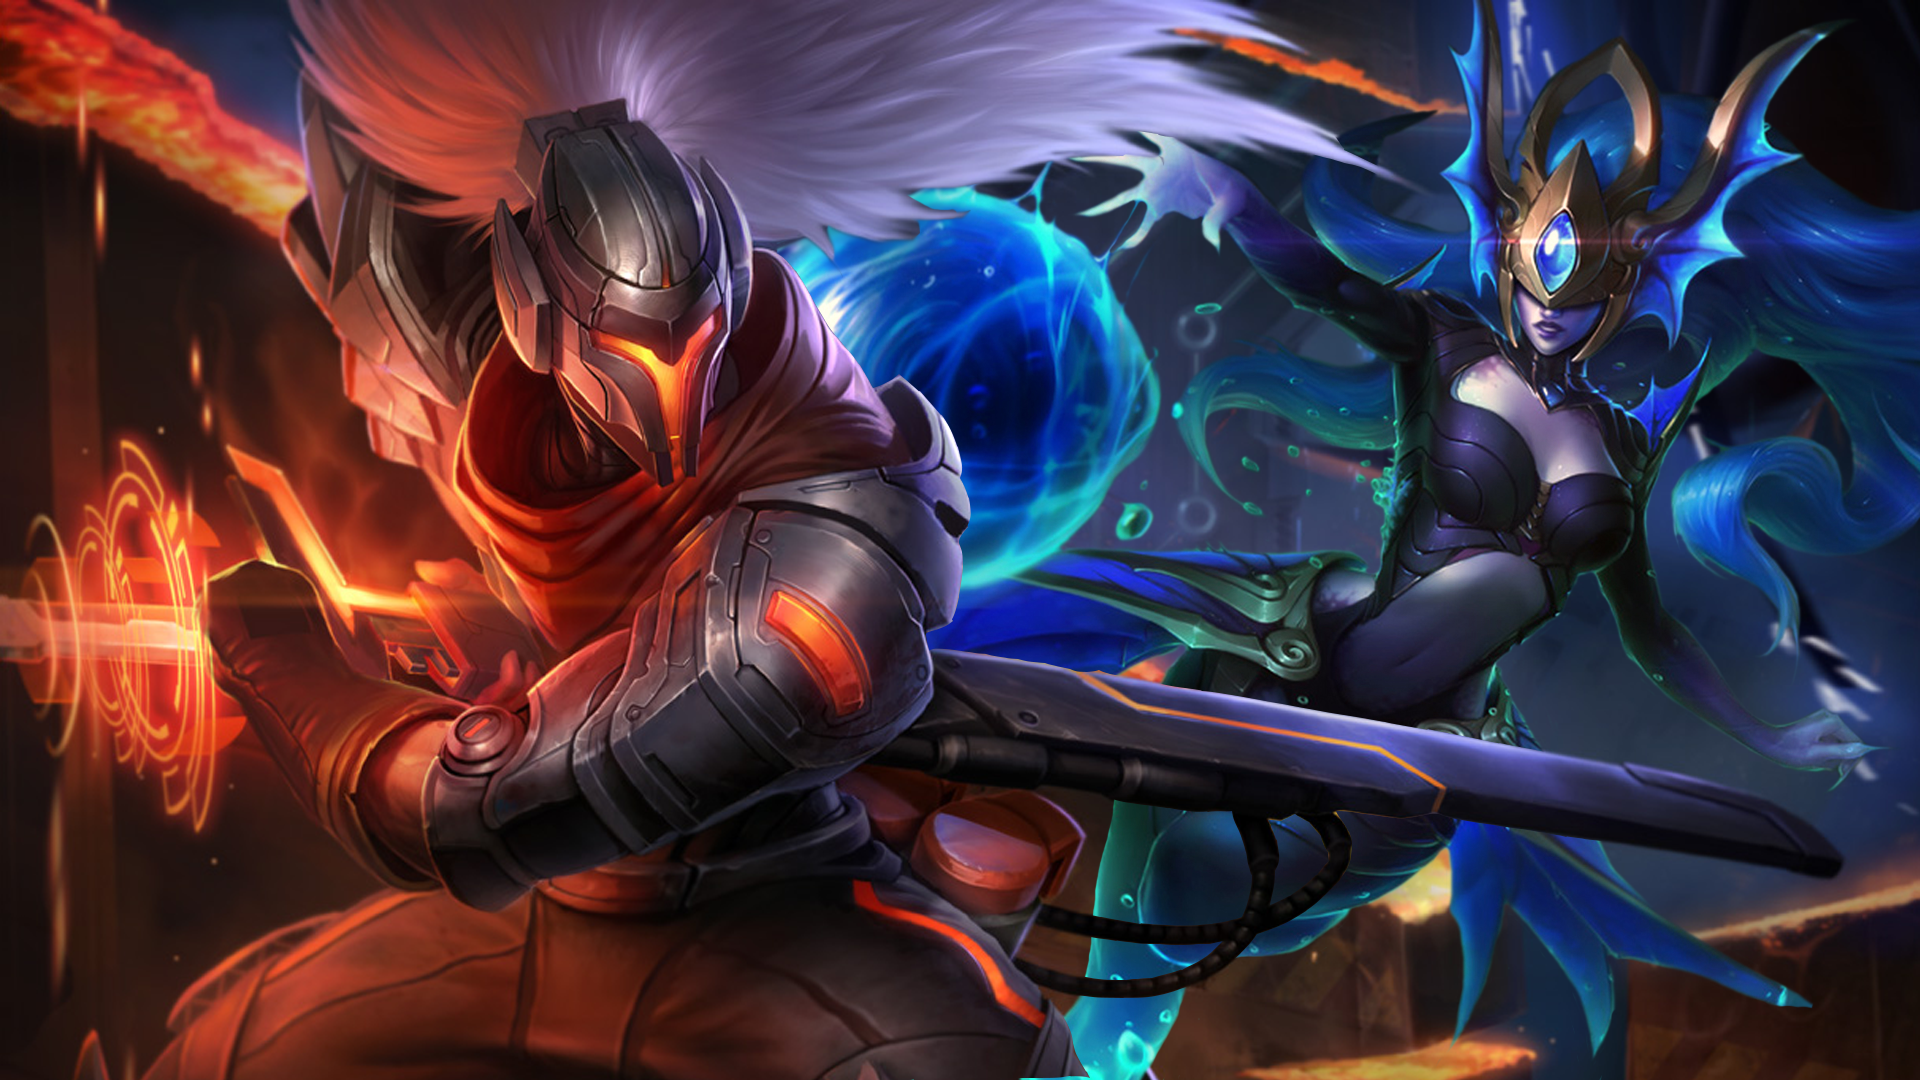 Yasuo Fantasy Girl League Of Legends Video Games Fantasy Art Pc Gaming Video Game Art Video Game Girls Armored 19x1080 Wallpaper Wallhaven Cc